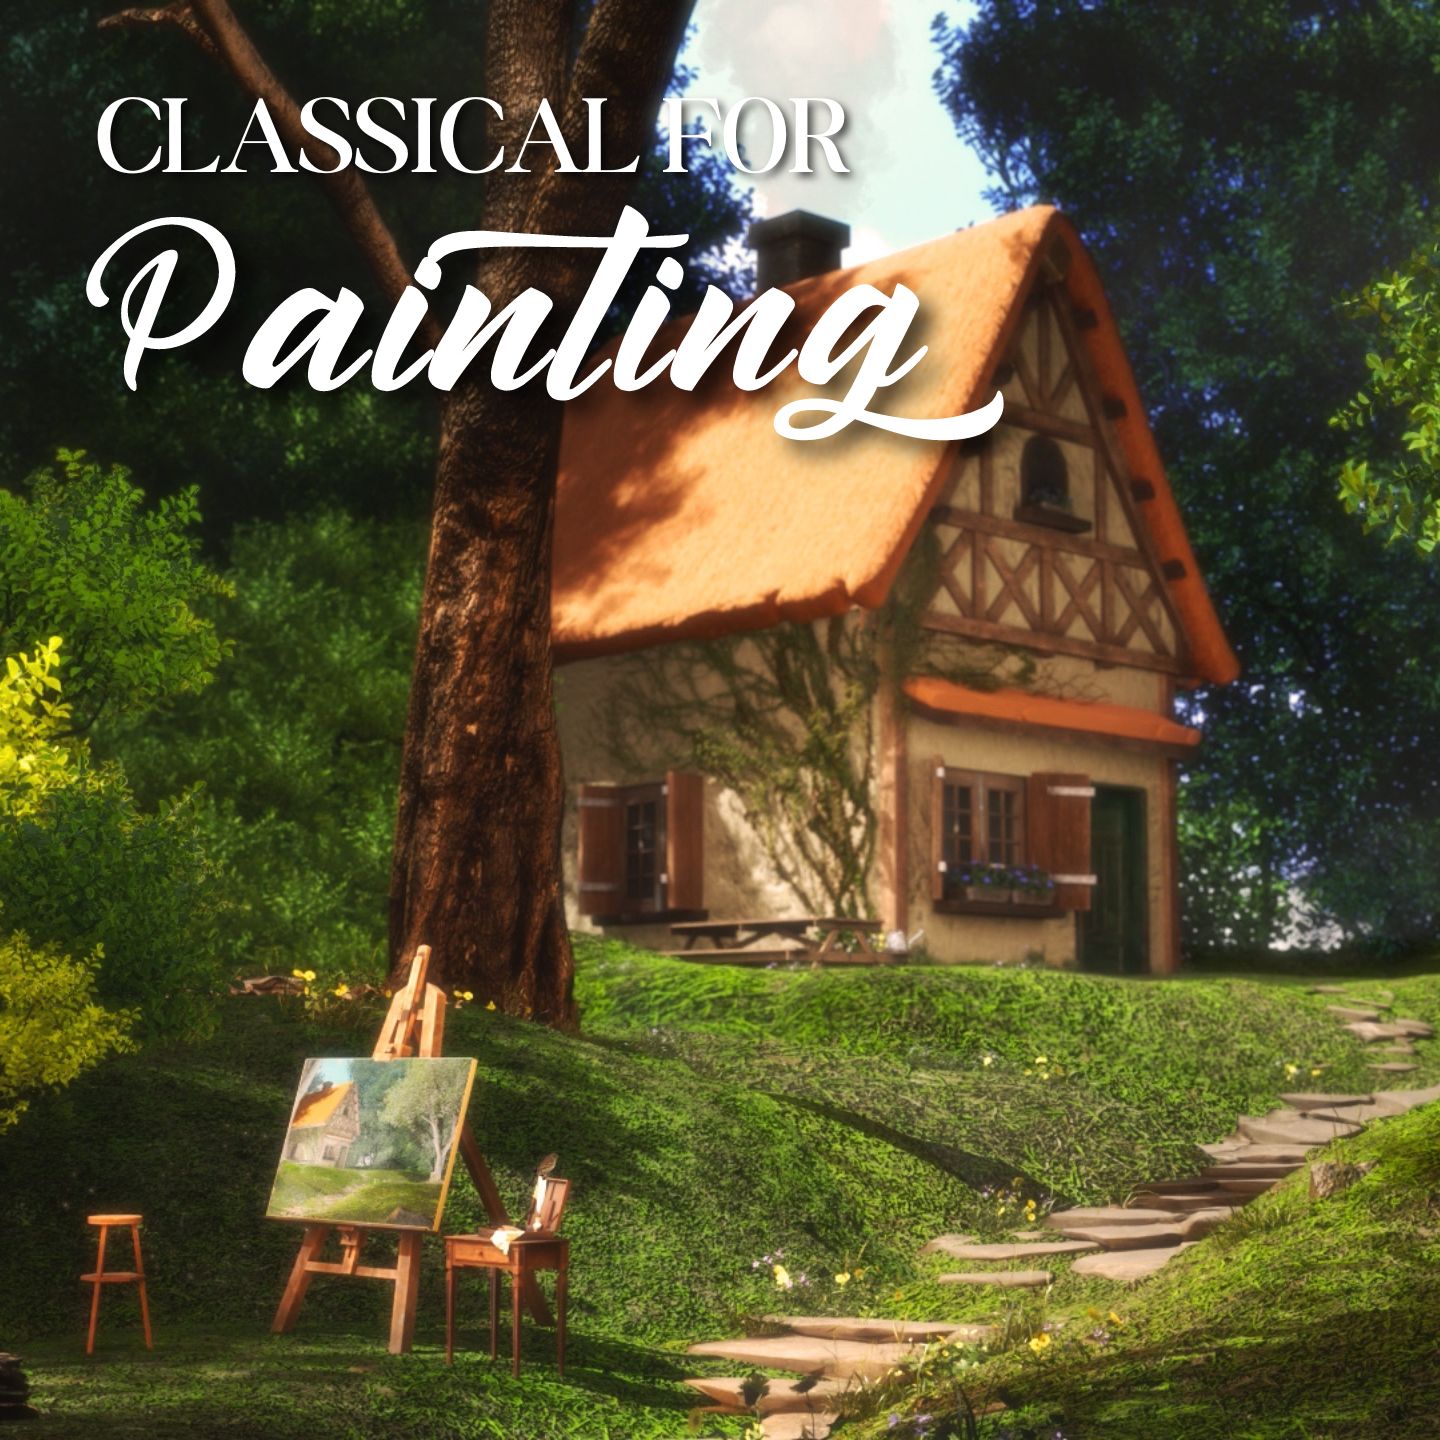 Classical Music for Drawing and Painting in the Peaceful Countryside